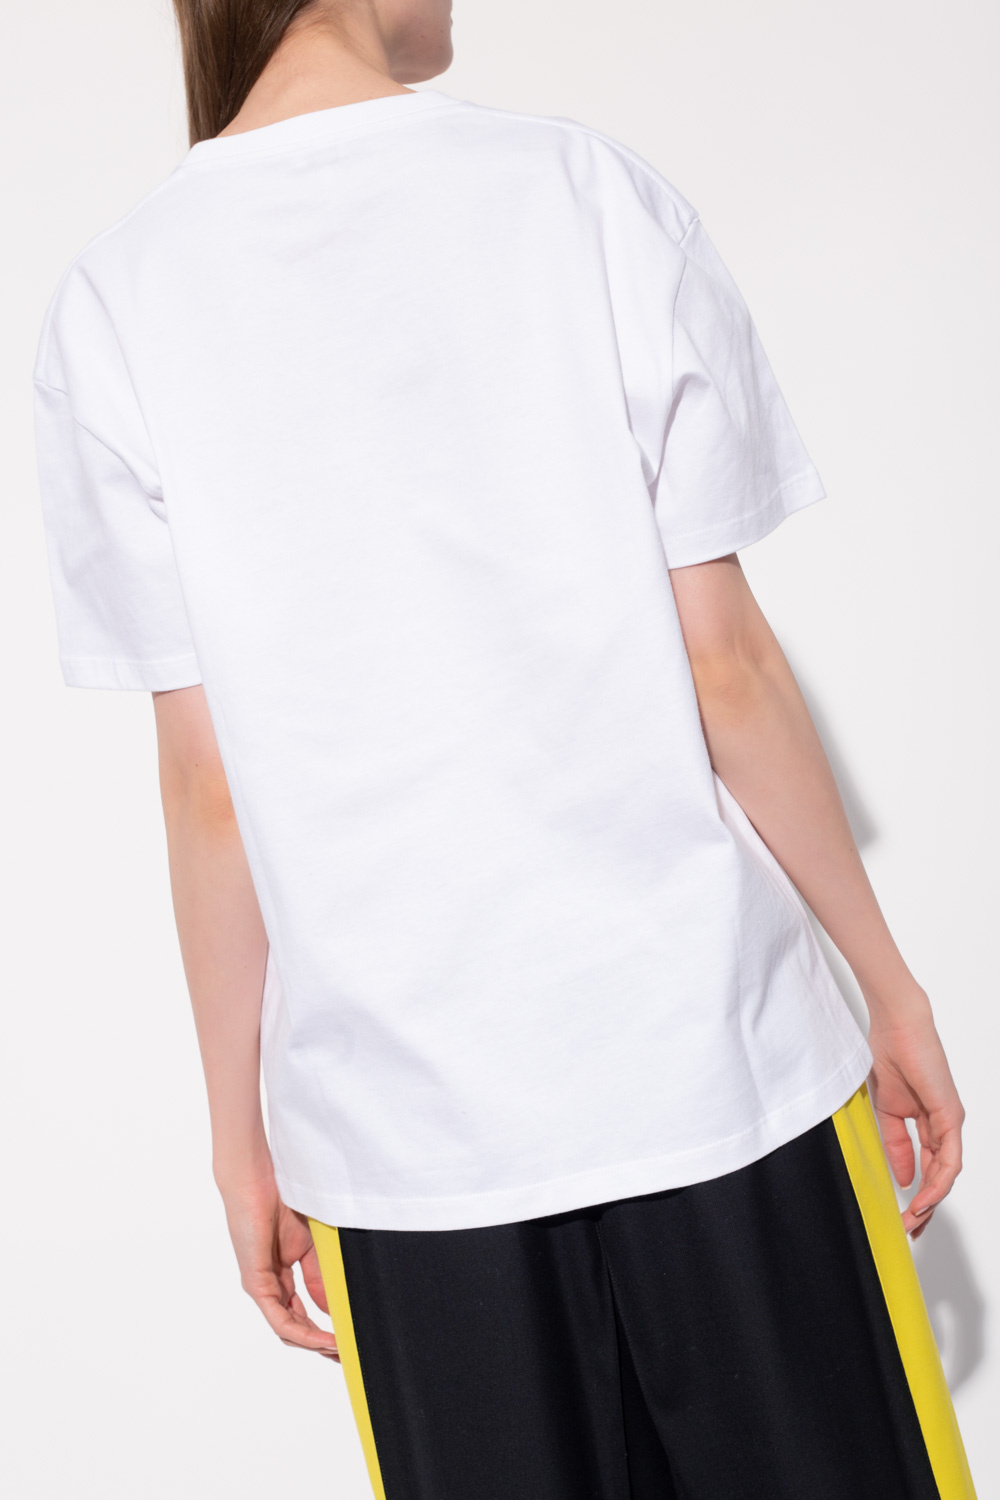 Loewe Logo Shirt in Viscose and Silk White/Multicolor